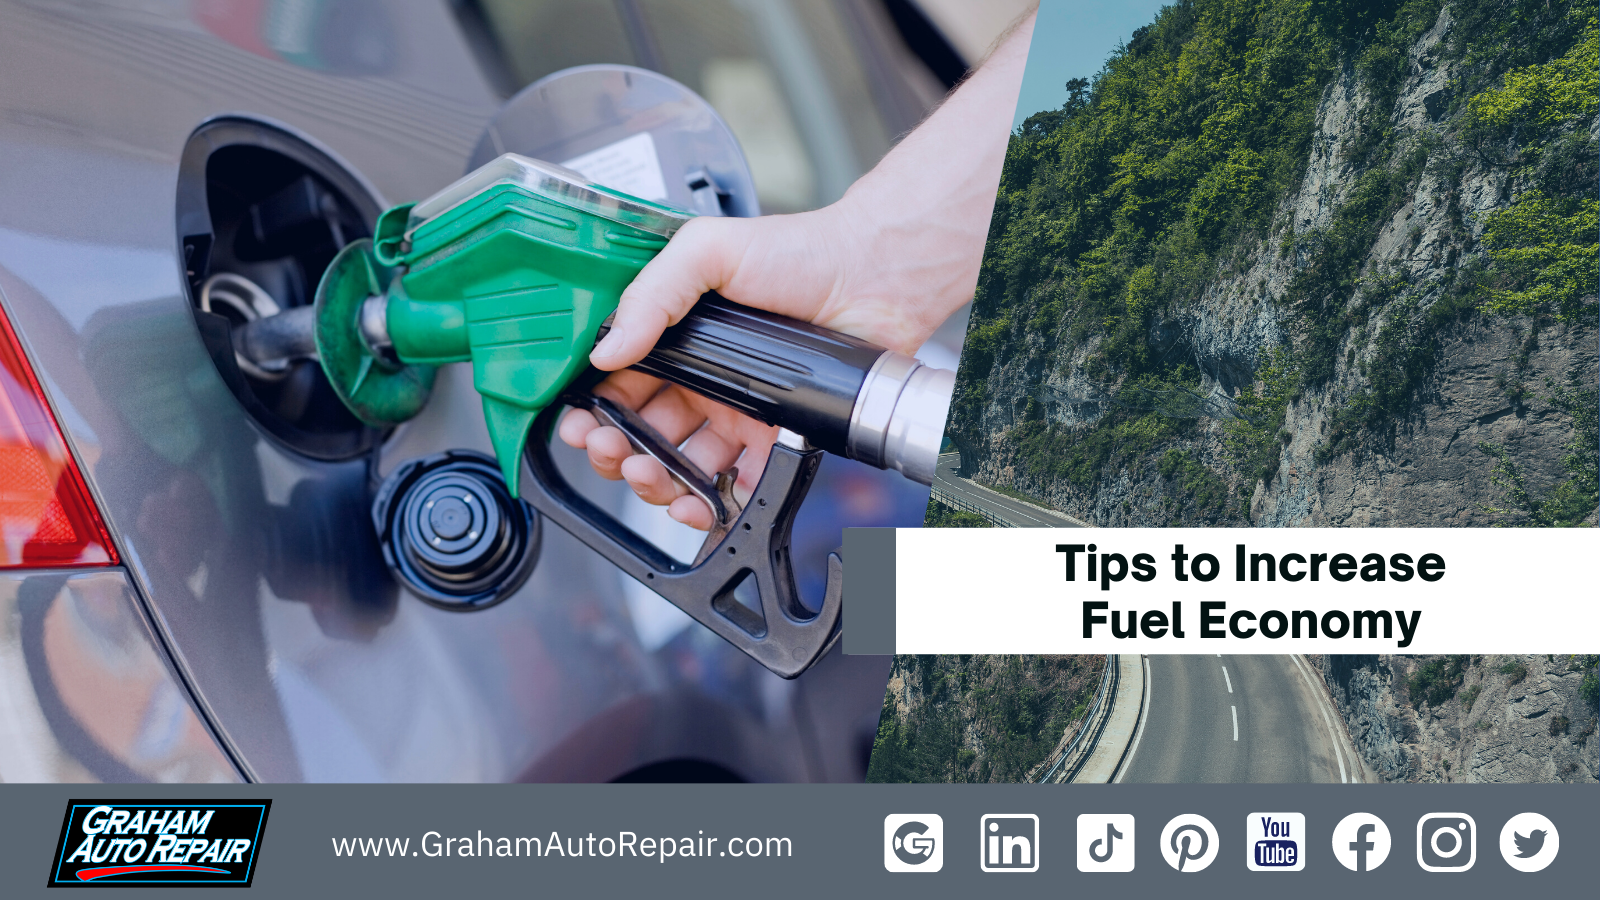 How Do I Save Money on Gas? Increase Fuel Economy with Graham Auto Repair Blog